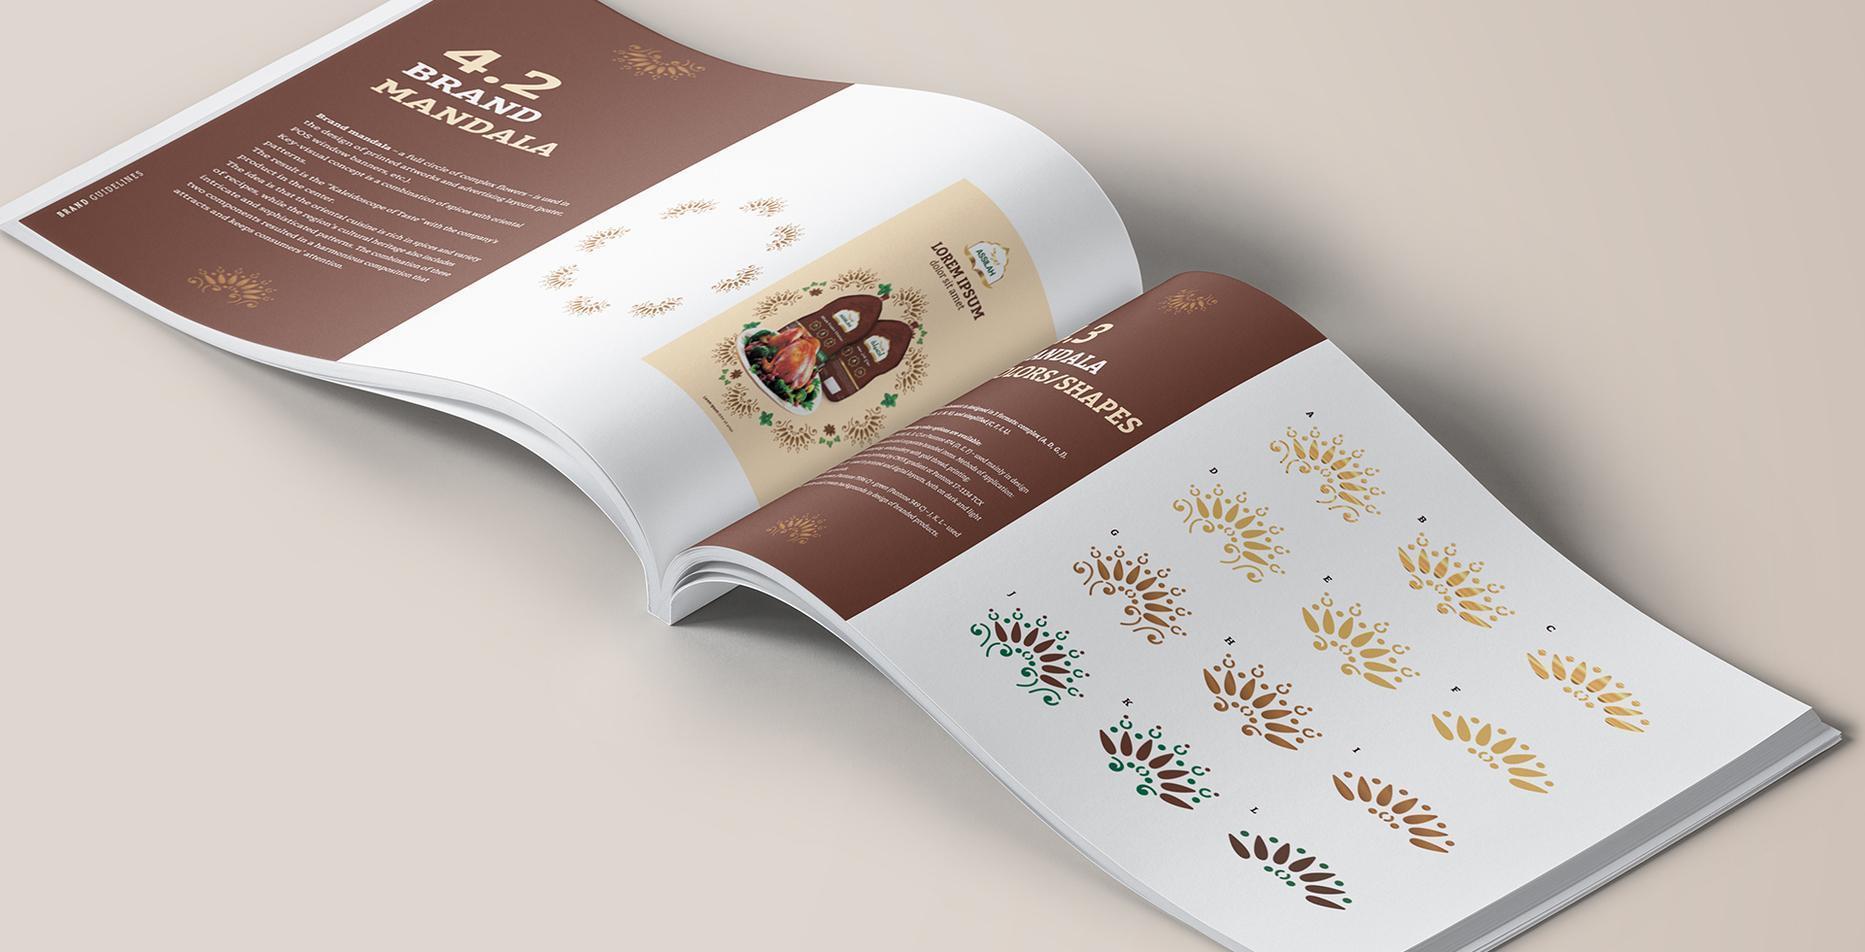 Project: Launching the MHP brand on the Arab market. Identity, brand book — Rubarb - Image - 2